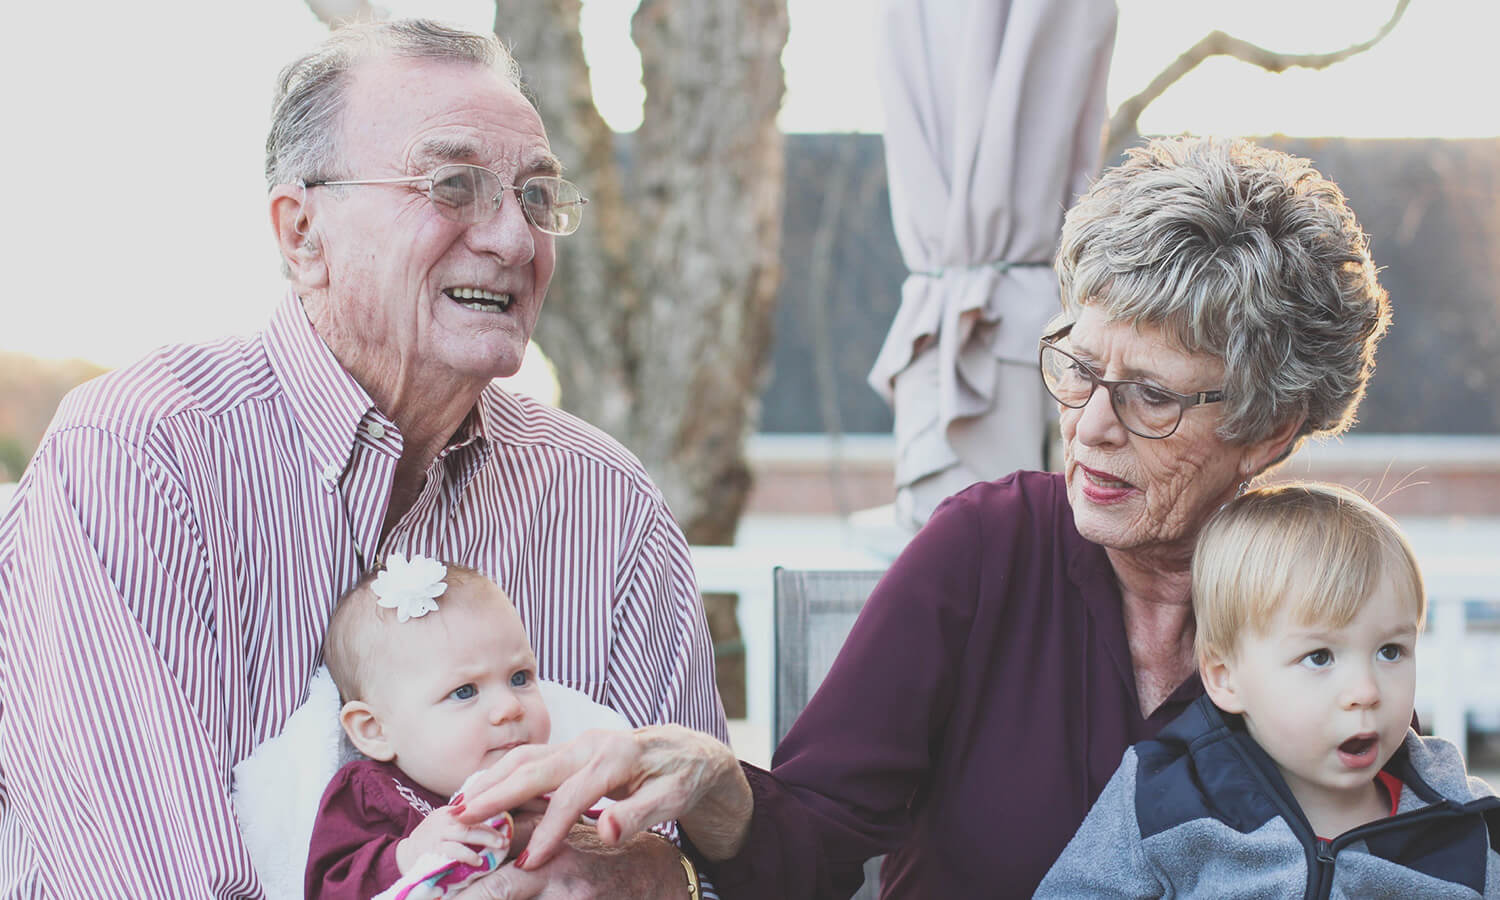 What does the Bible say about caring for your old parents?